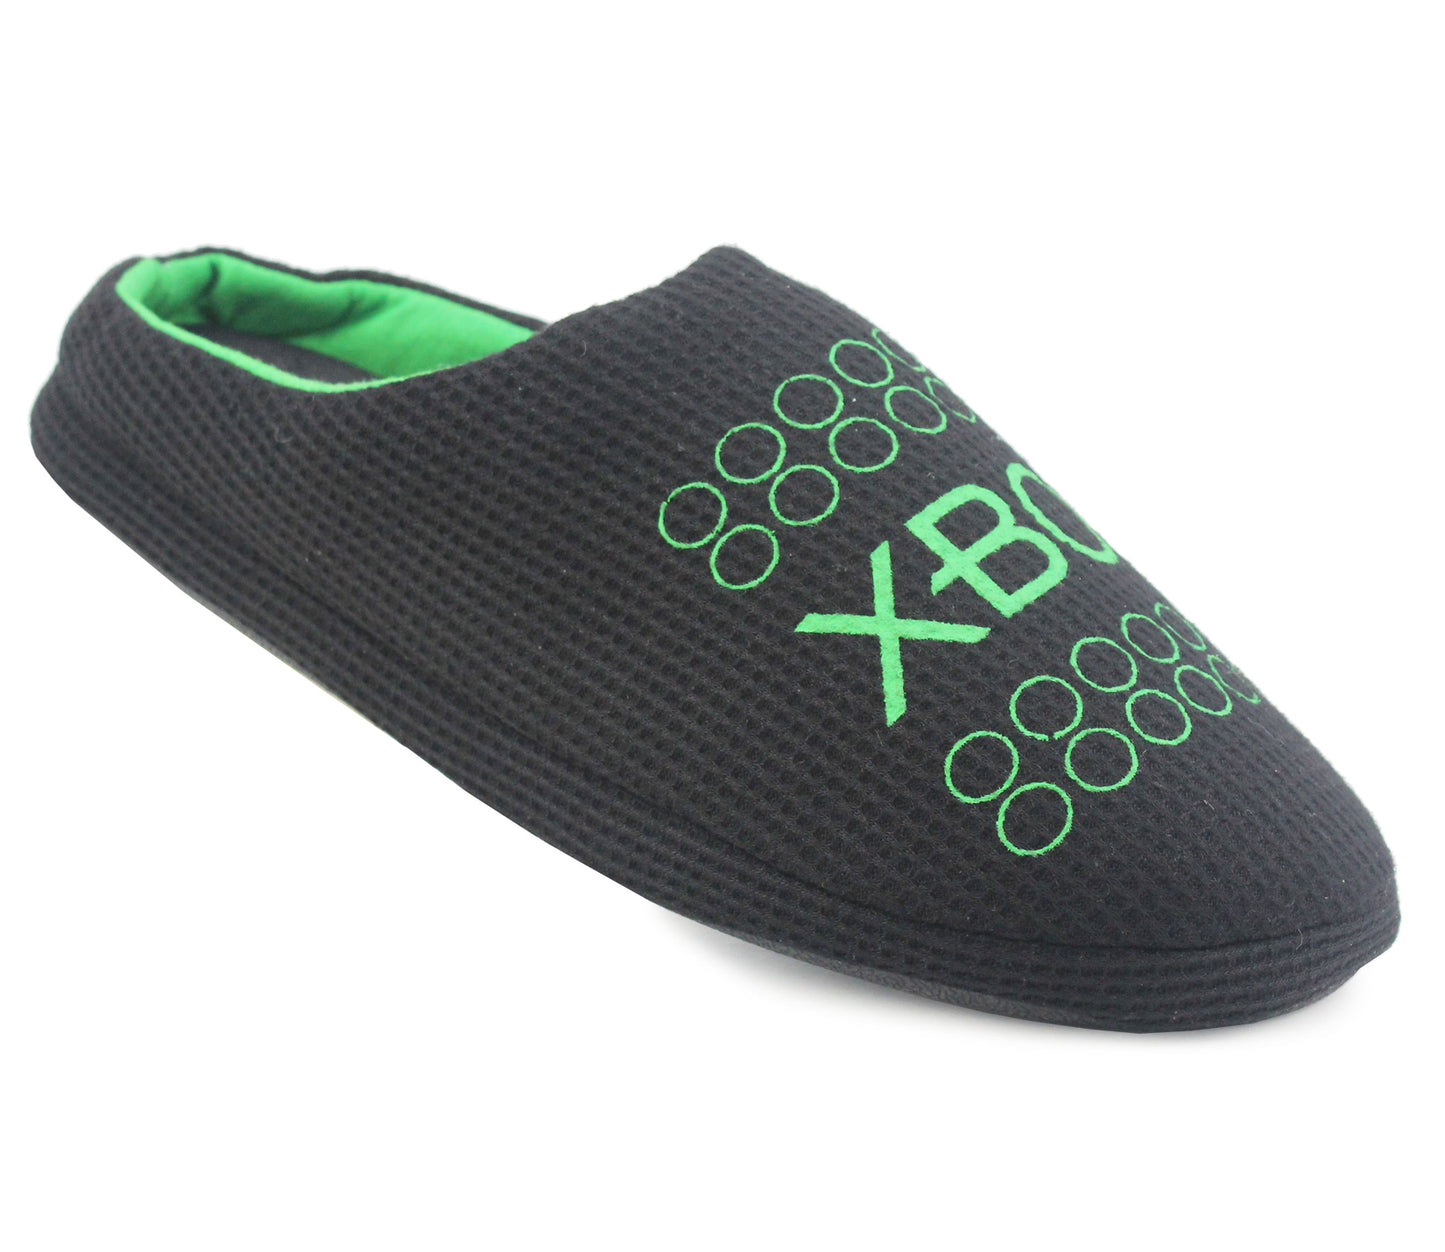 XBOXDOT Mens XBOX Mules Slippers